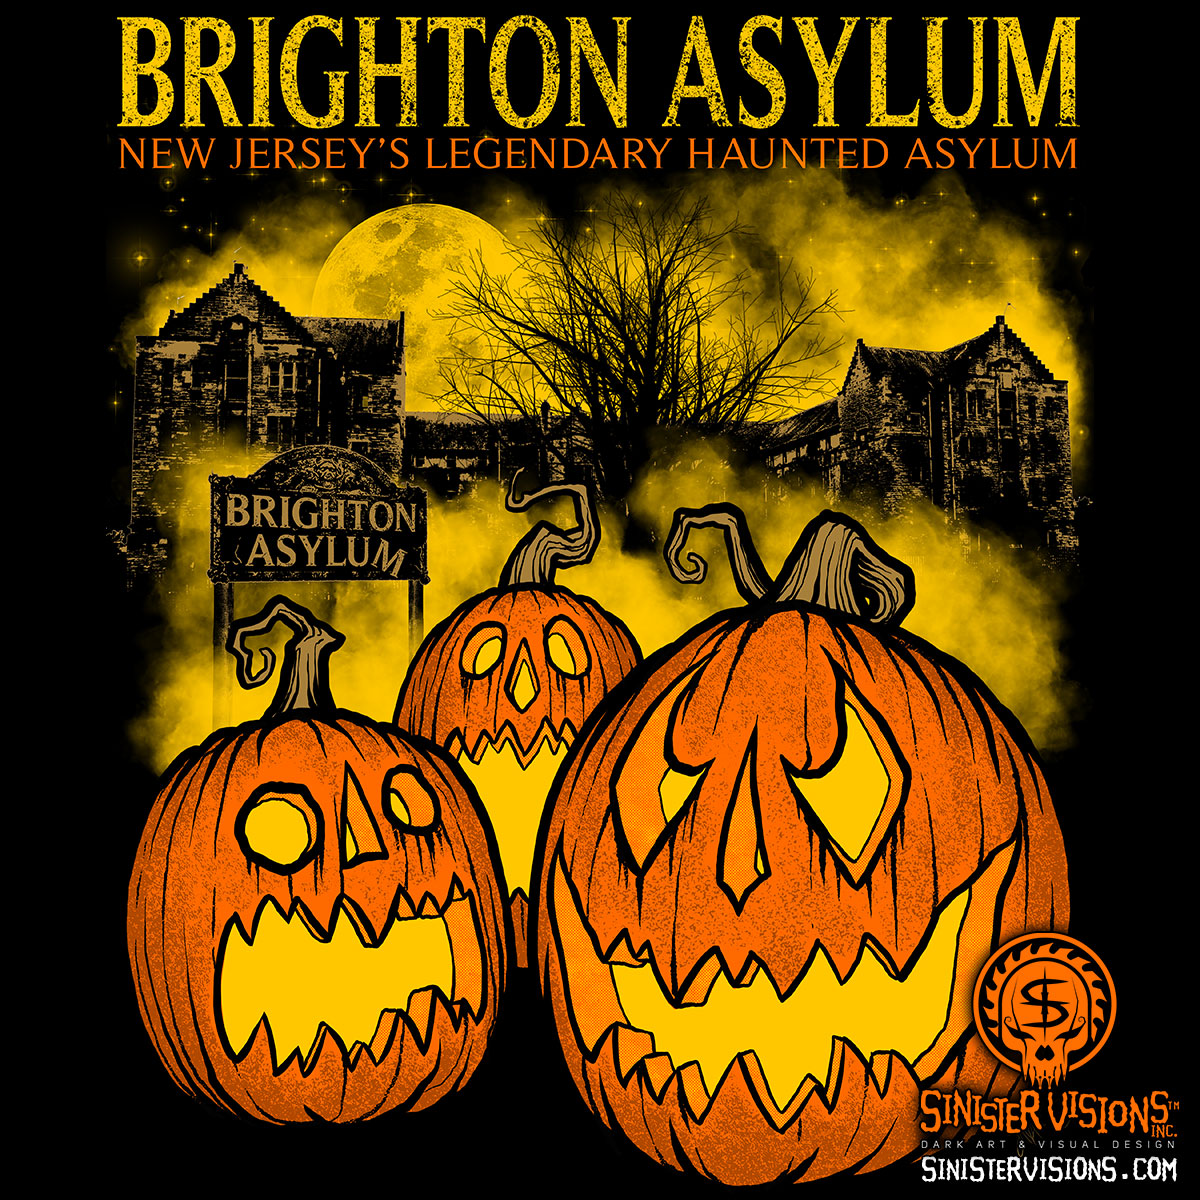 Another t-shirt design for Brighton Asylum #hauntedattraction
.
#sinistervisions #chadsavageart #halloweenart #halloweenartist #hauntedhouse #hauntindustry